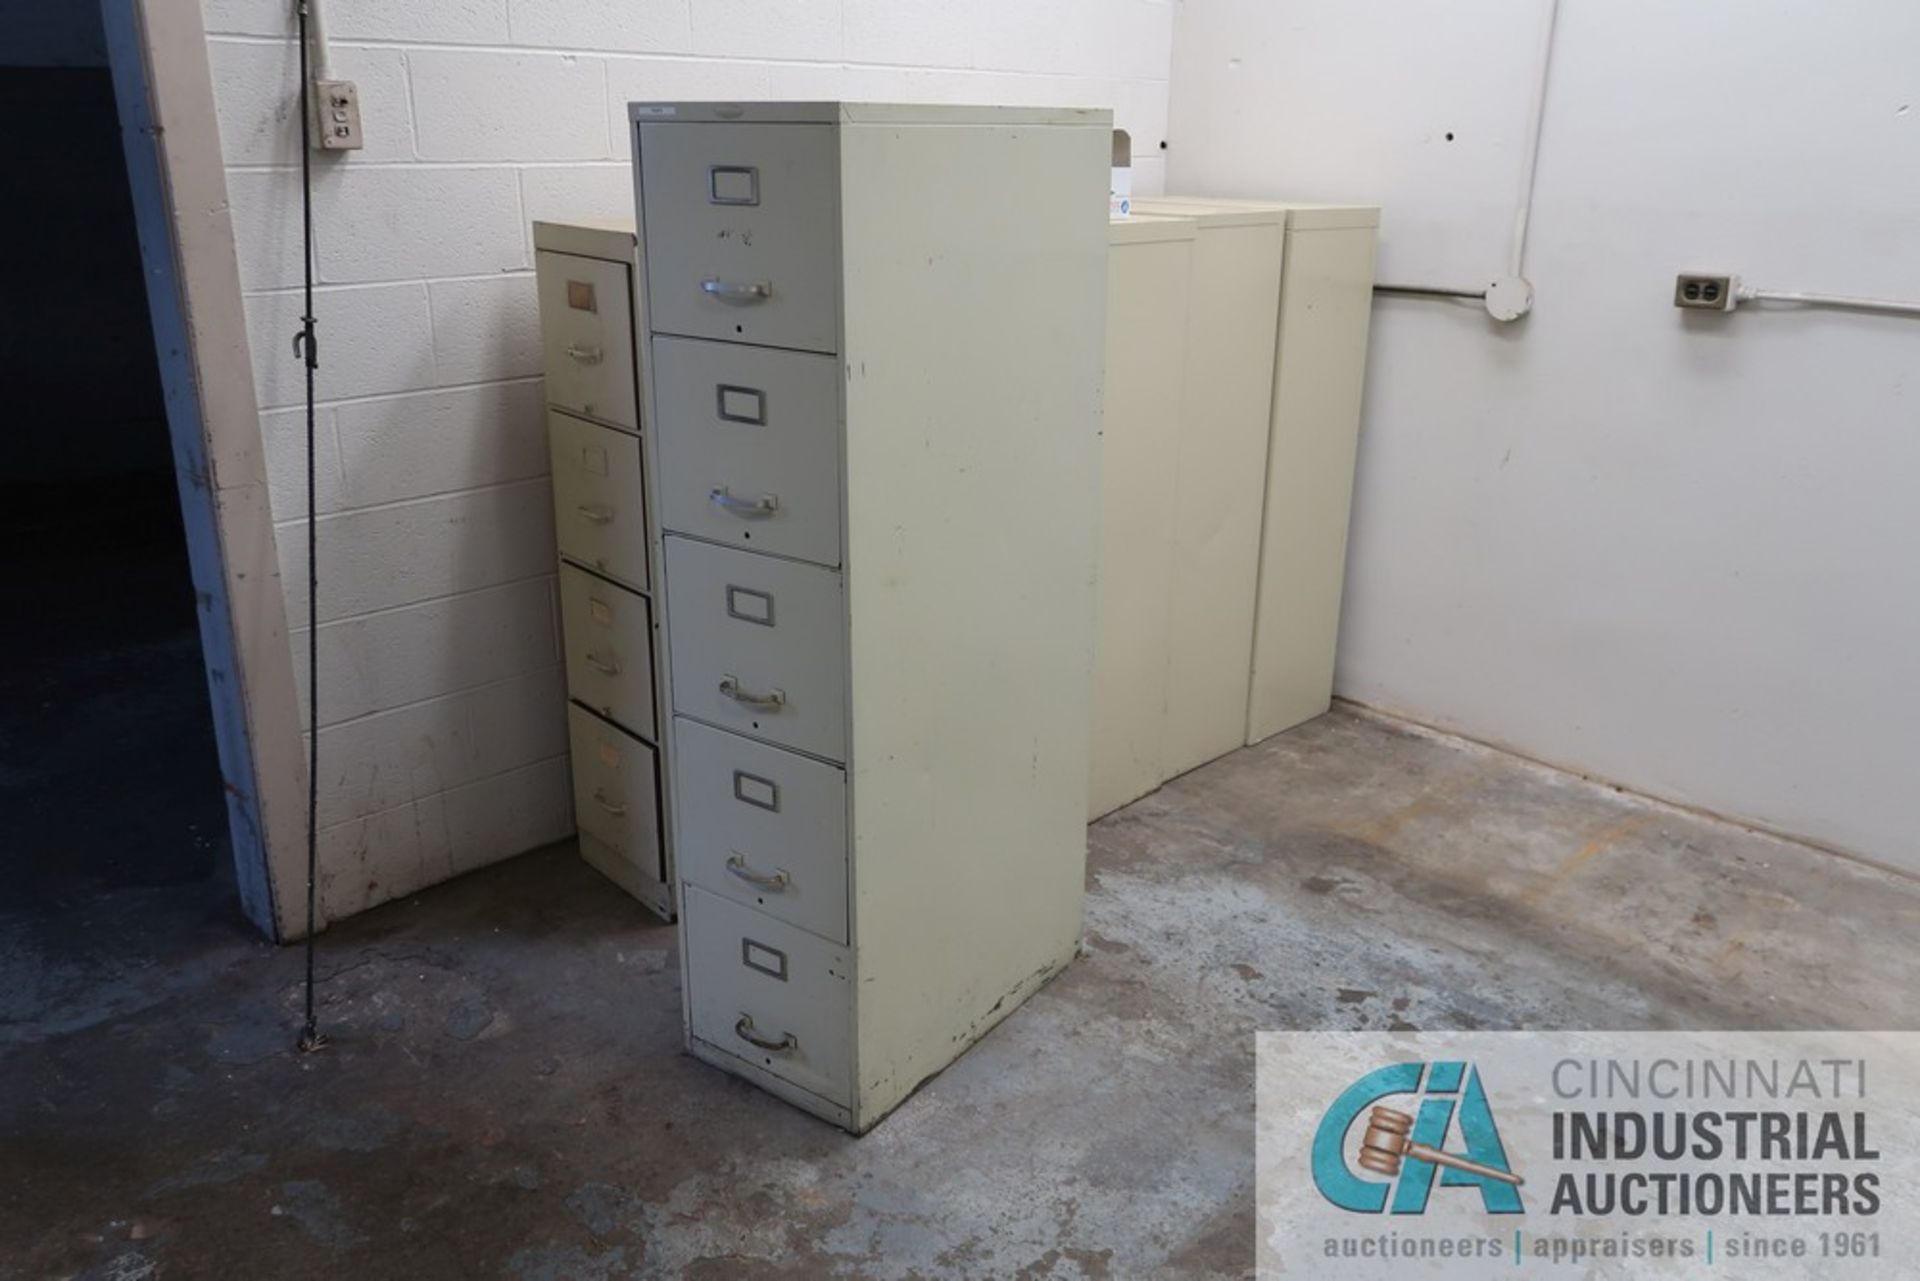 (LOT) MISCELLANEOUS STEEL CABINETS IN ROOM - Image 2 of 2